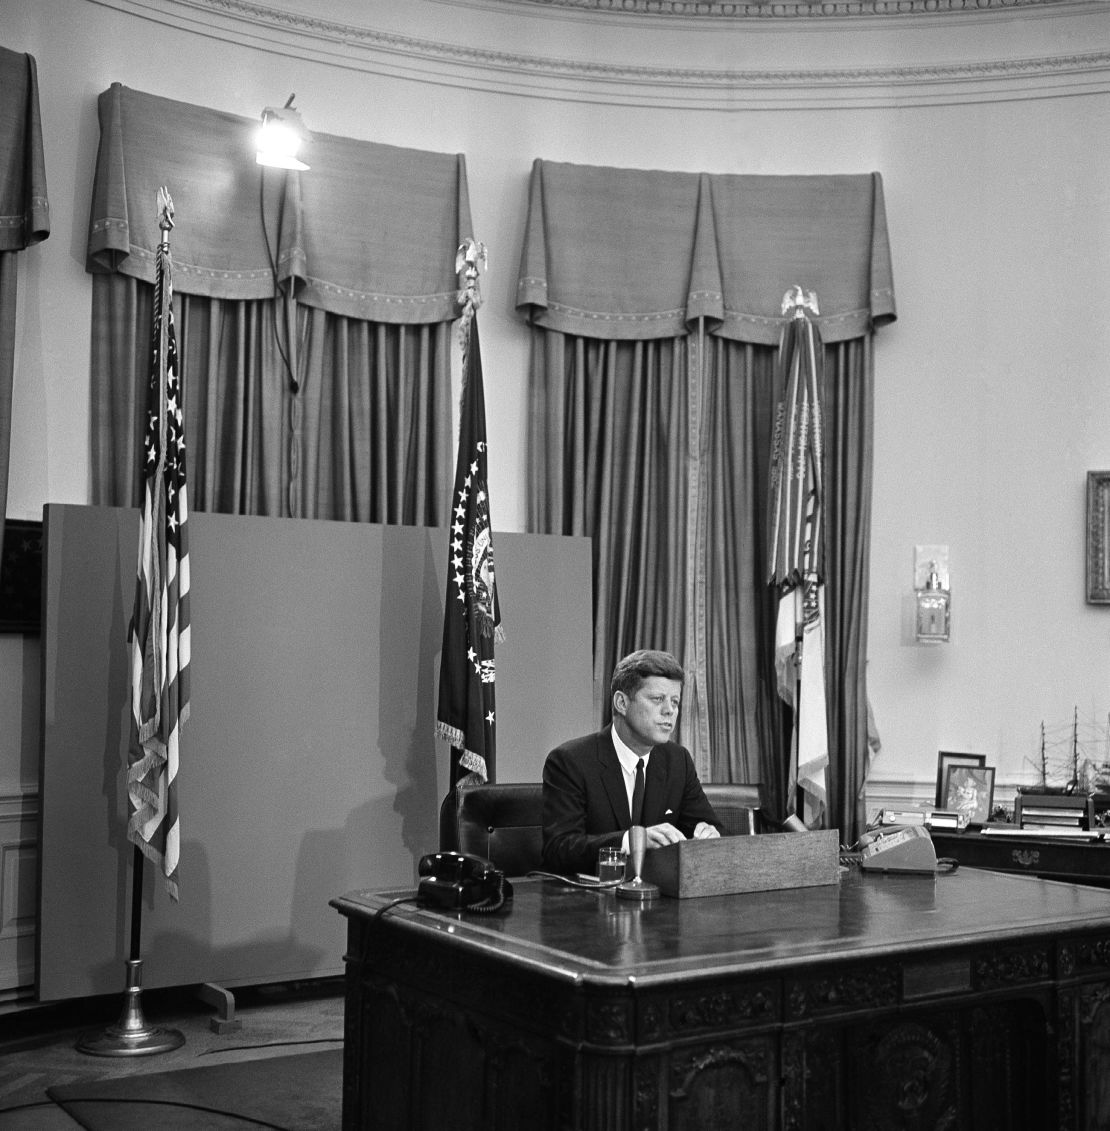 President John F. Kennedy is shown as he started his radio-television address to the nation on civil rights, June 11, 1963, in Washington.